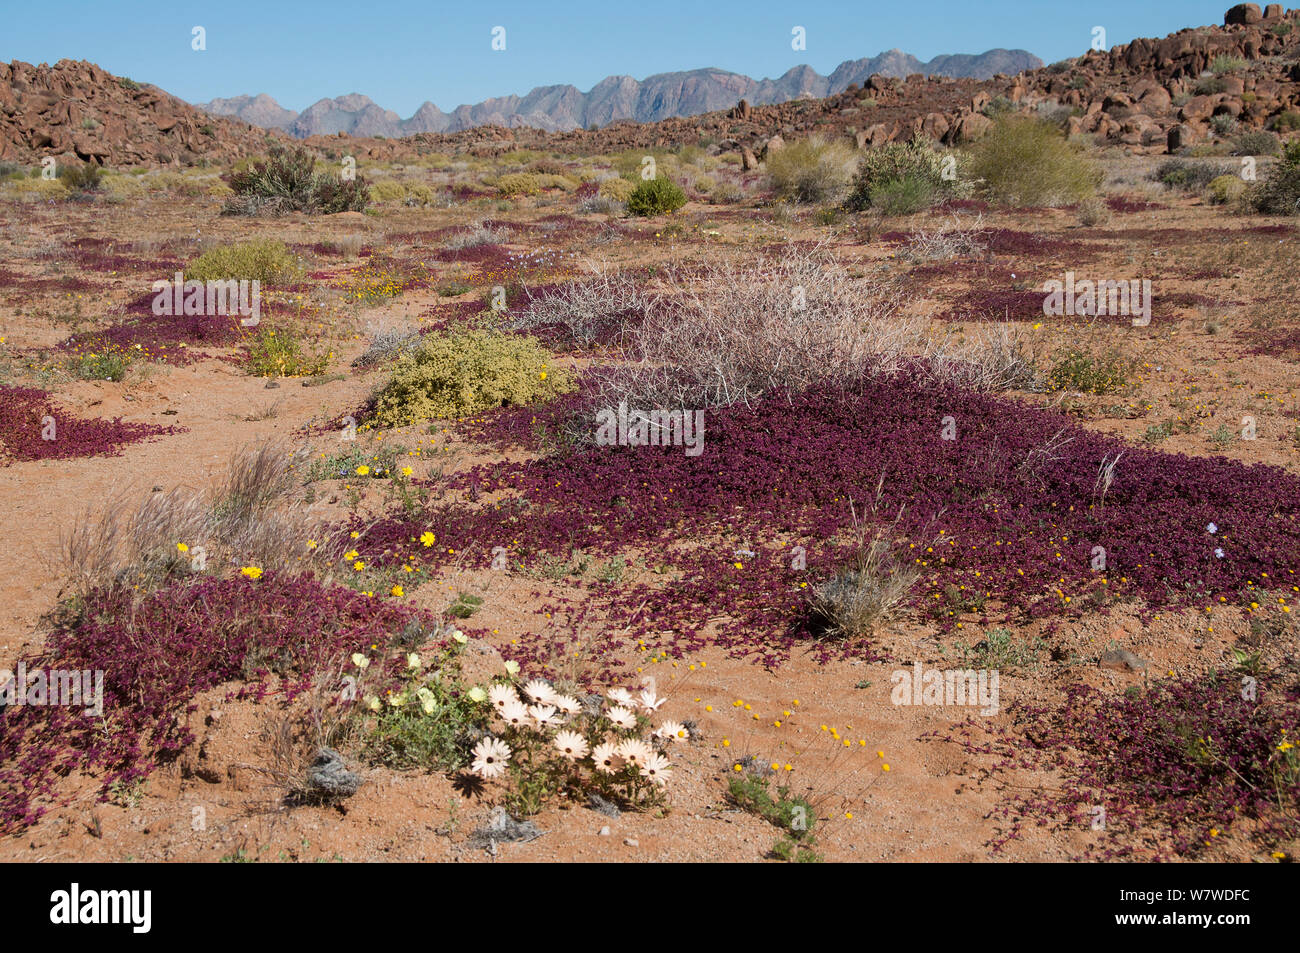 Flowering desert plants including Daisies (Asteraceae) Richtersveld National Park and World Heritage Site, Northern Cape, South Africa, August. Stock Photo